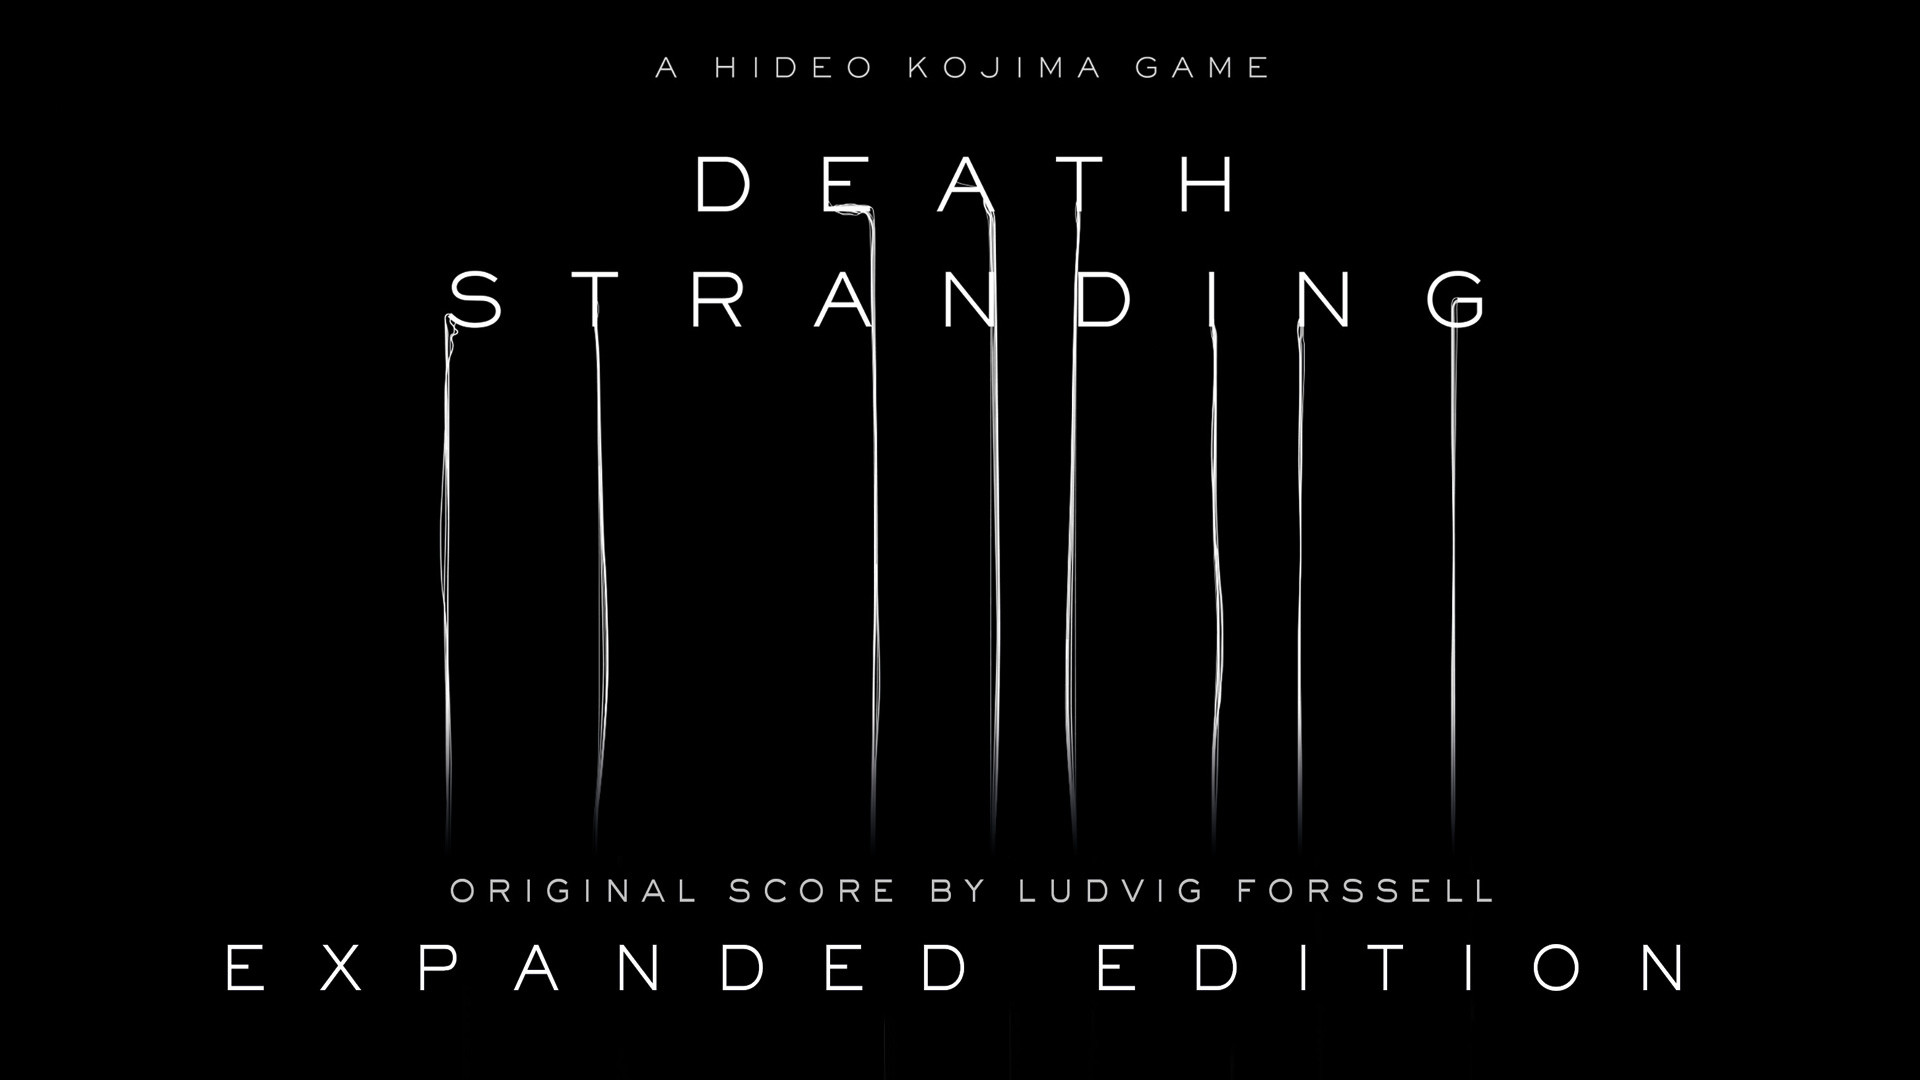 DEATH STRANDING Soundtrack Expanded Edition Featured Screenshot #1